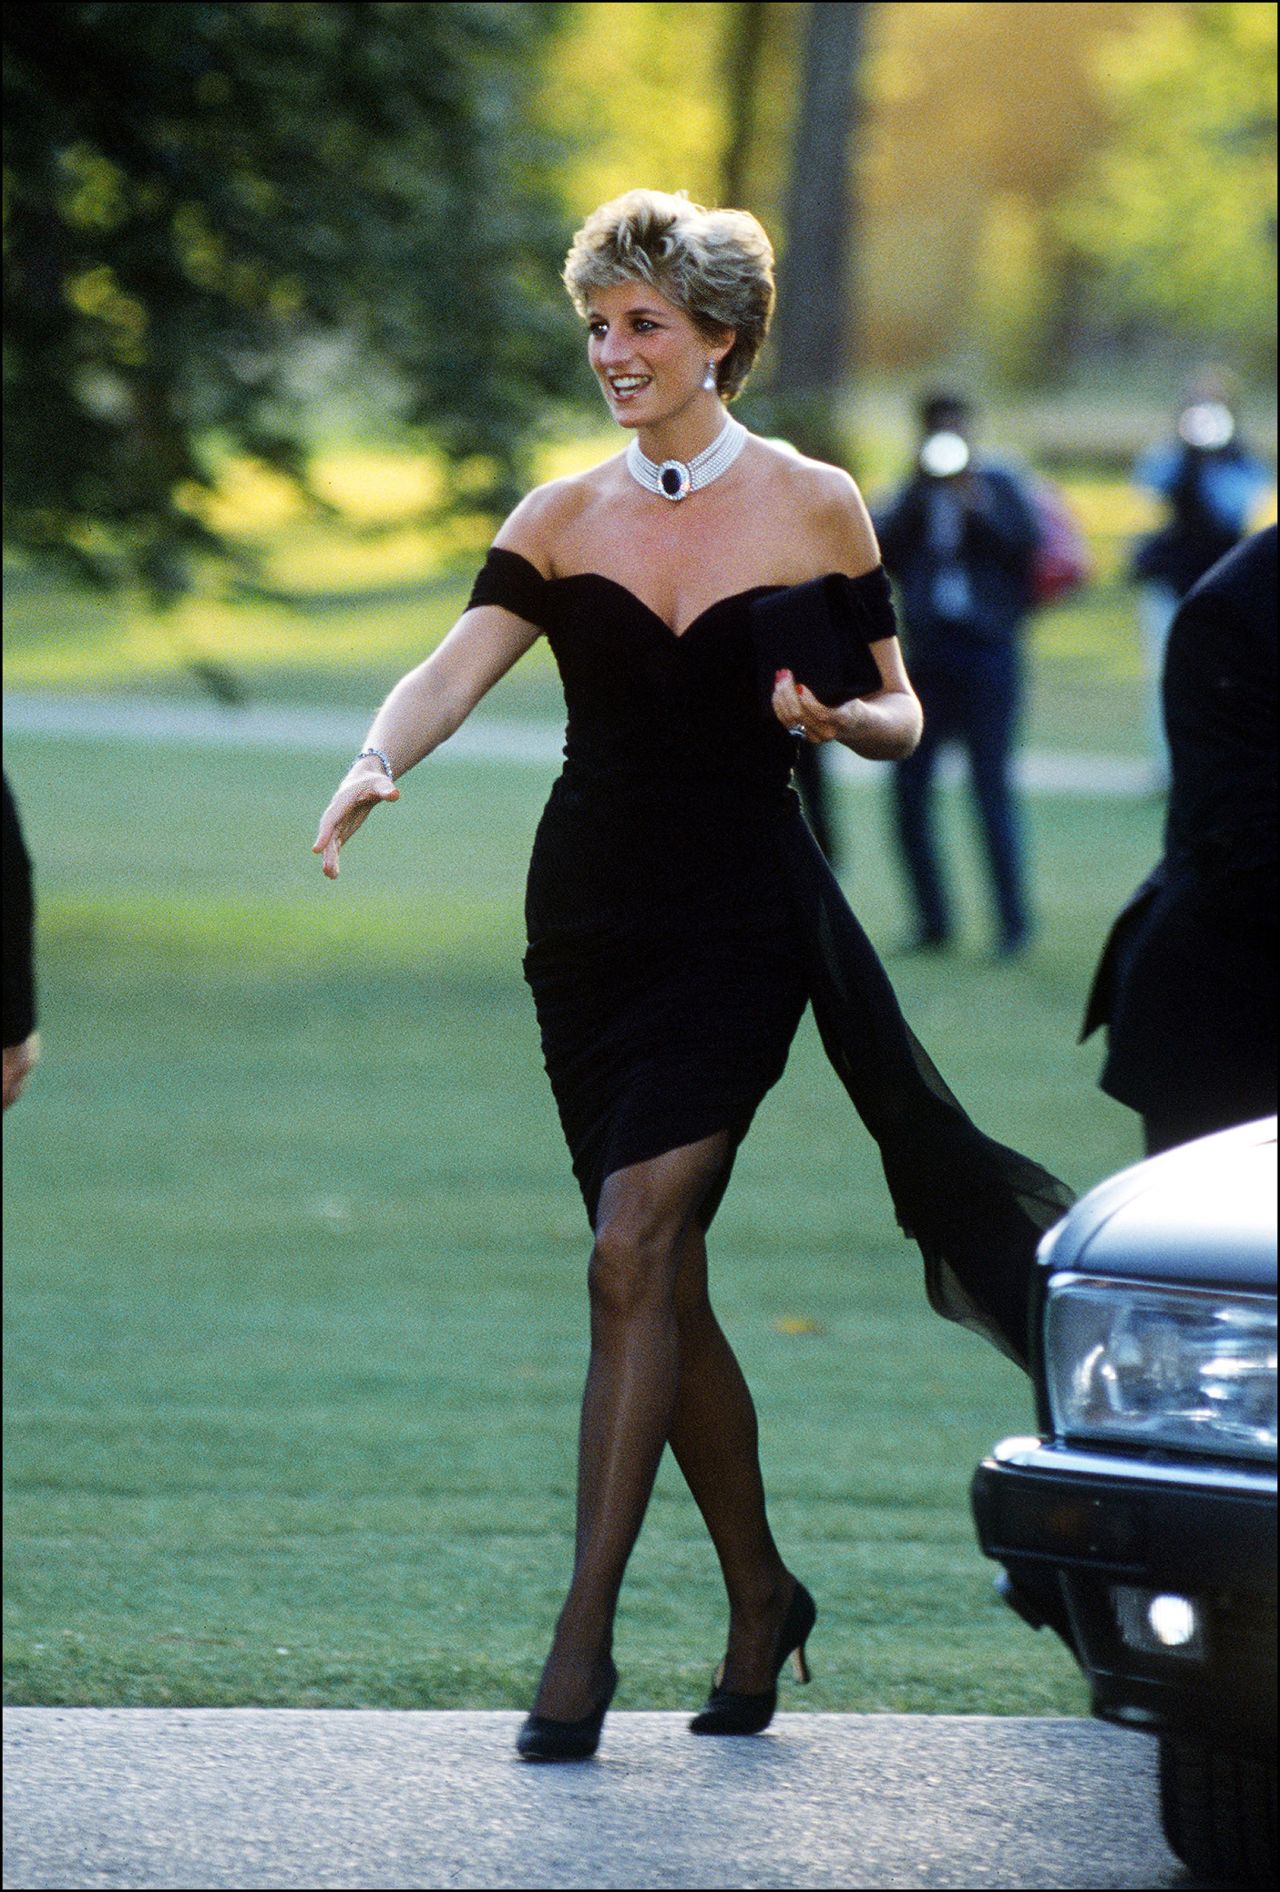 Princess Diana wearing a Christina Stambolian dress nicknamed the 'revenge dress,' as it was worn the same day Prince Charles admitted to adultery.